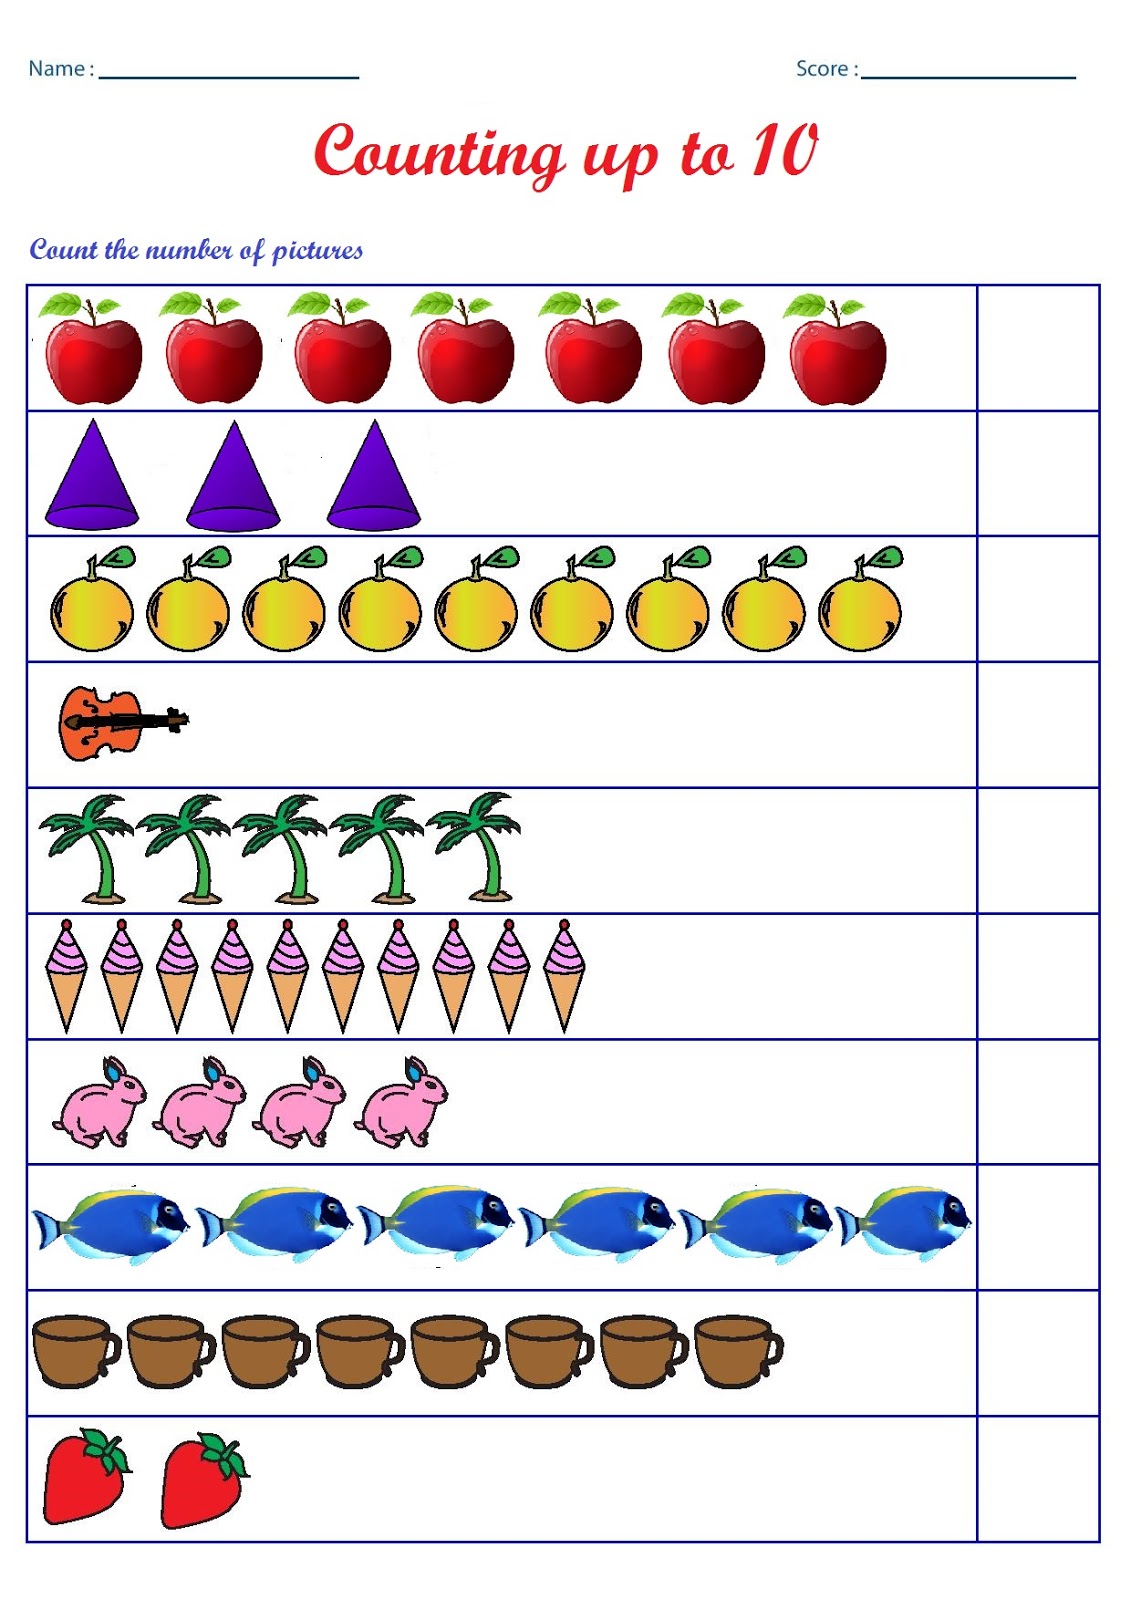 Kindergarten Worksheets Free Teaching Resources And Lesson Plans Counting Worksheets Count 